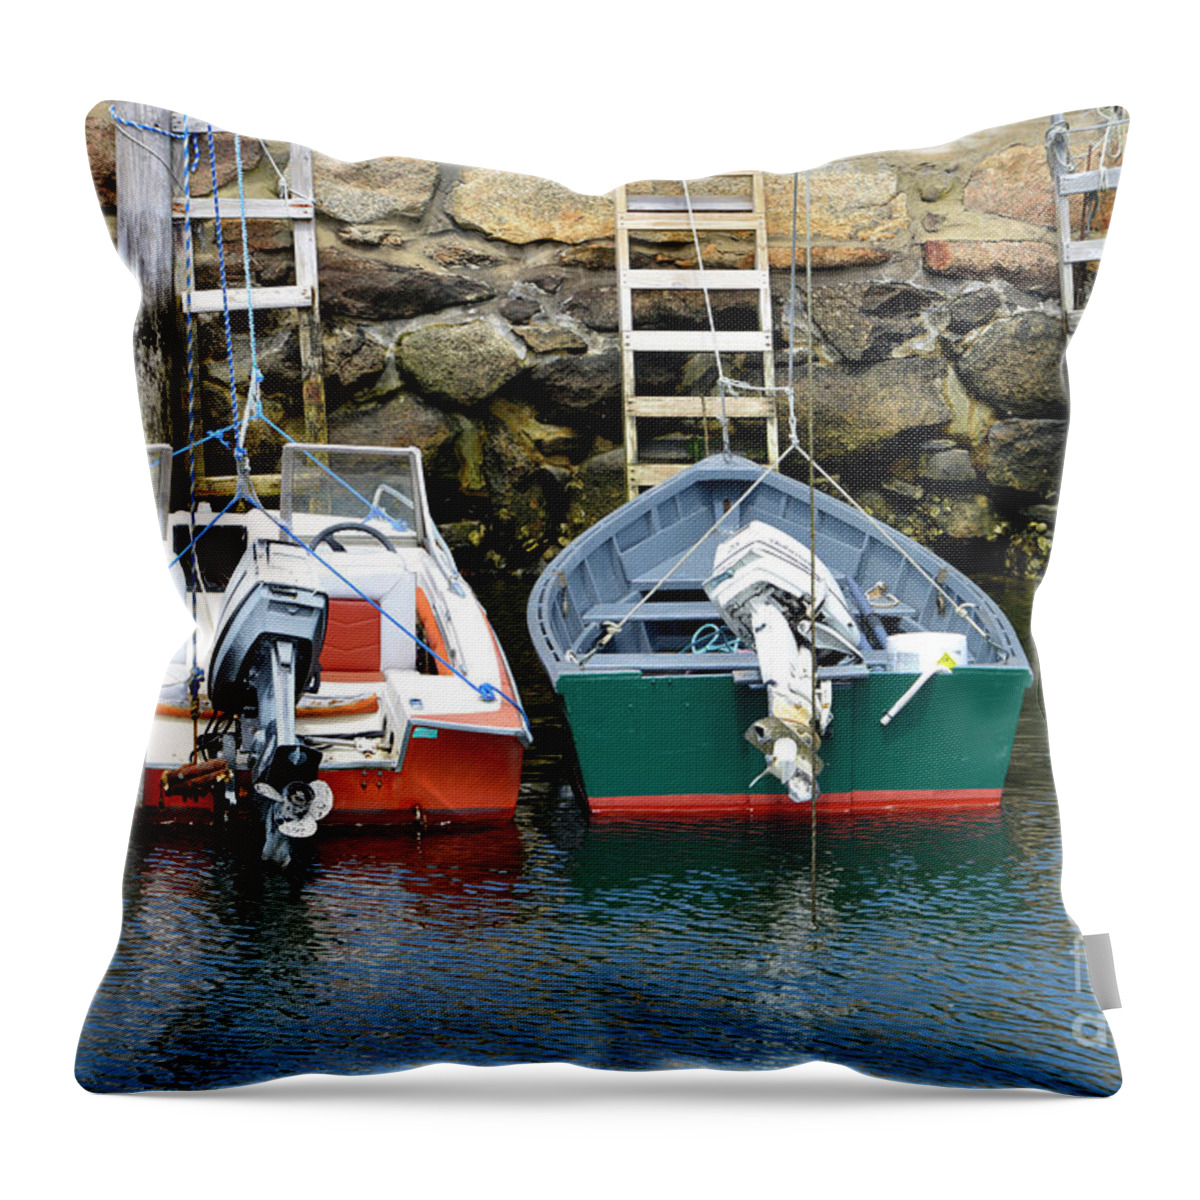 Landscape Throw Pillow featuring the photograph The Ladder by Alison Belsan Horton